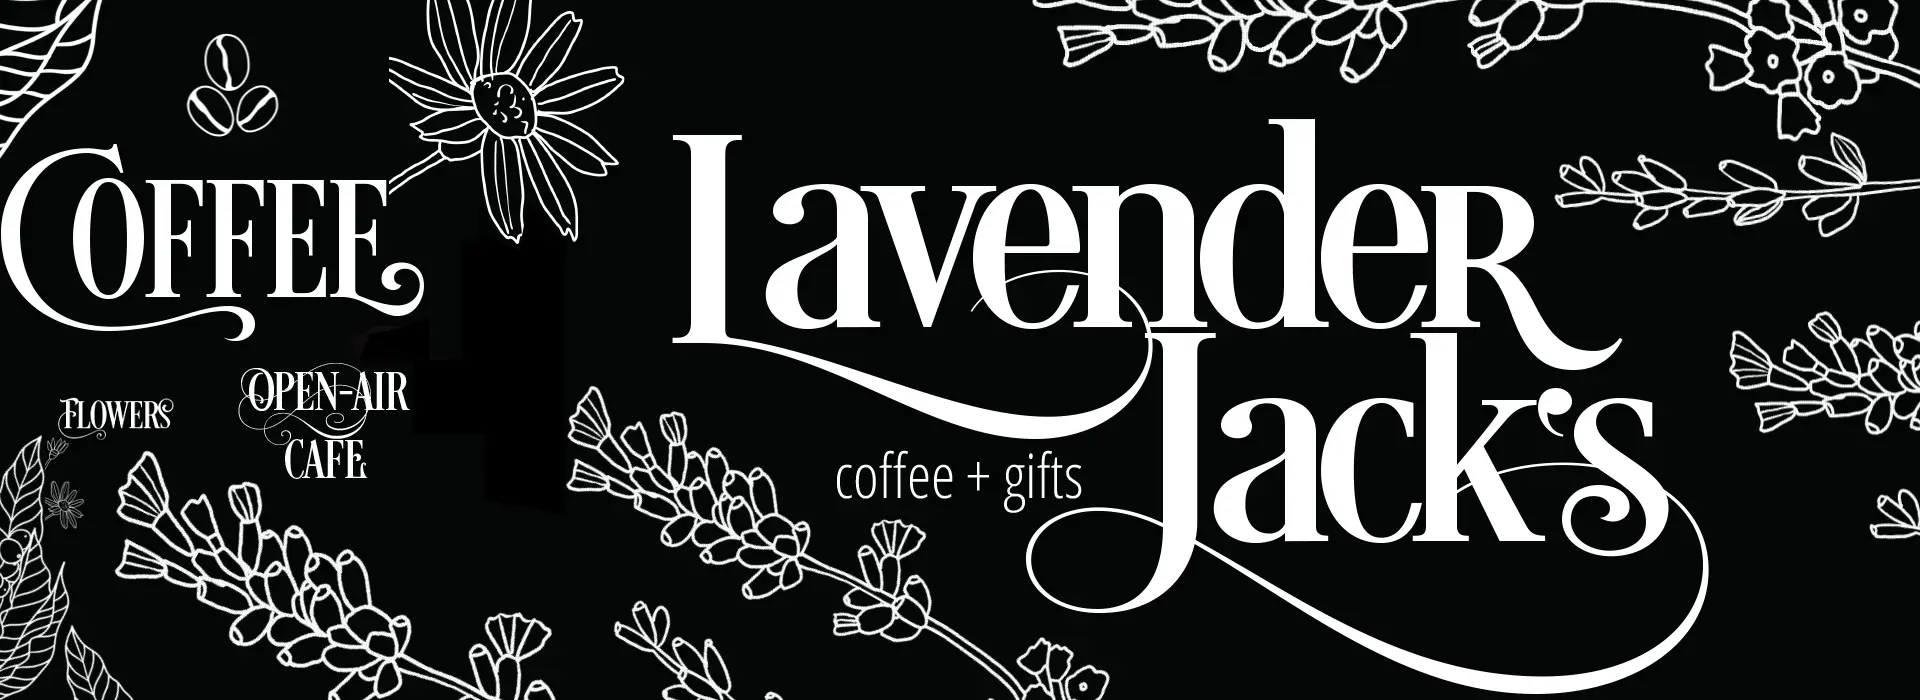 Lavender Jacks Coffee Gifts Flowers and More